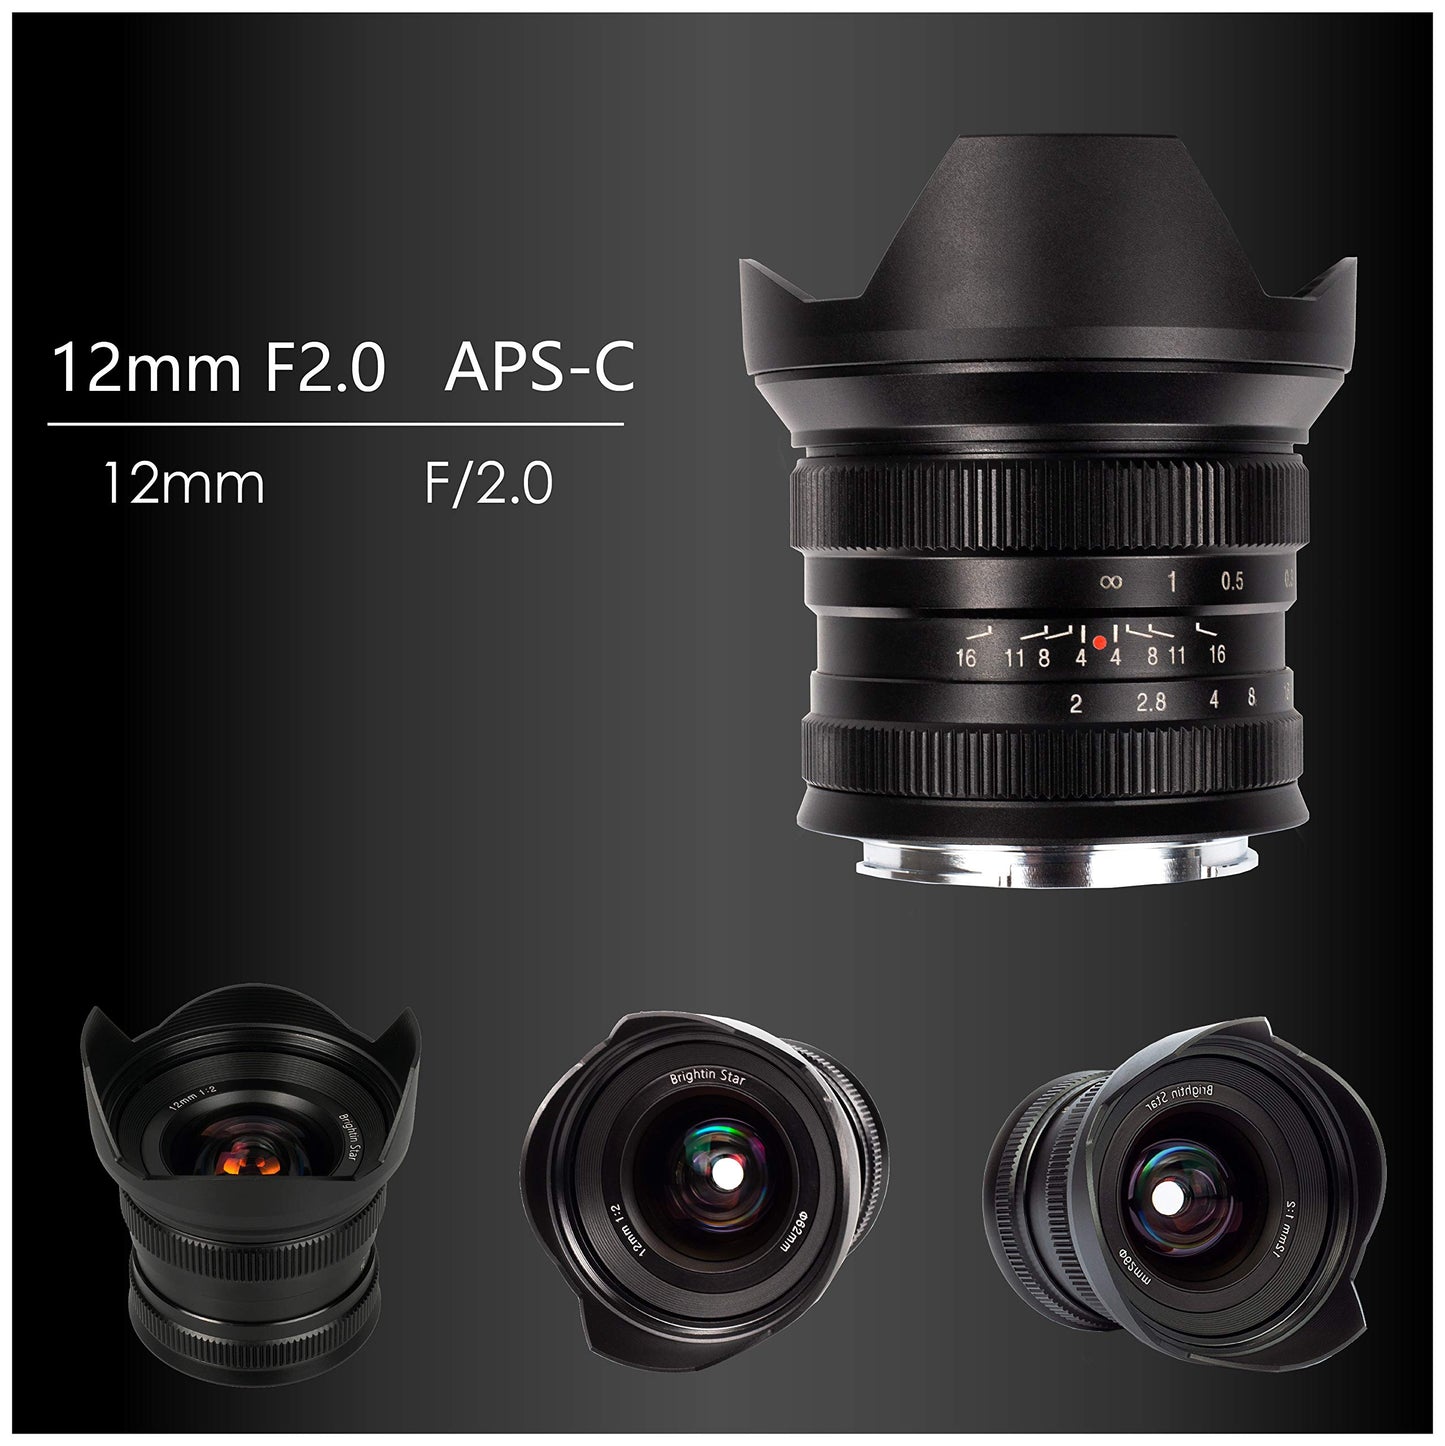 12mm F2.0 Ultra Wide-Angle Big Aperture APS-C Manual Focus Mirrorless Cameras Lens, Fit for Sony E Mount